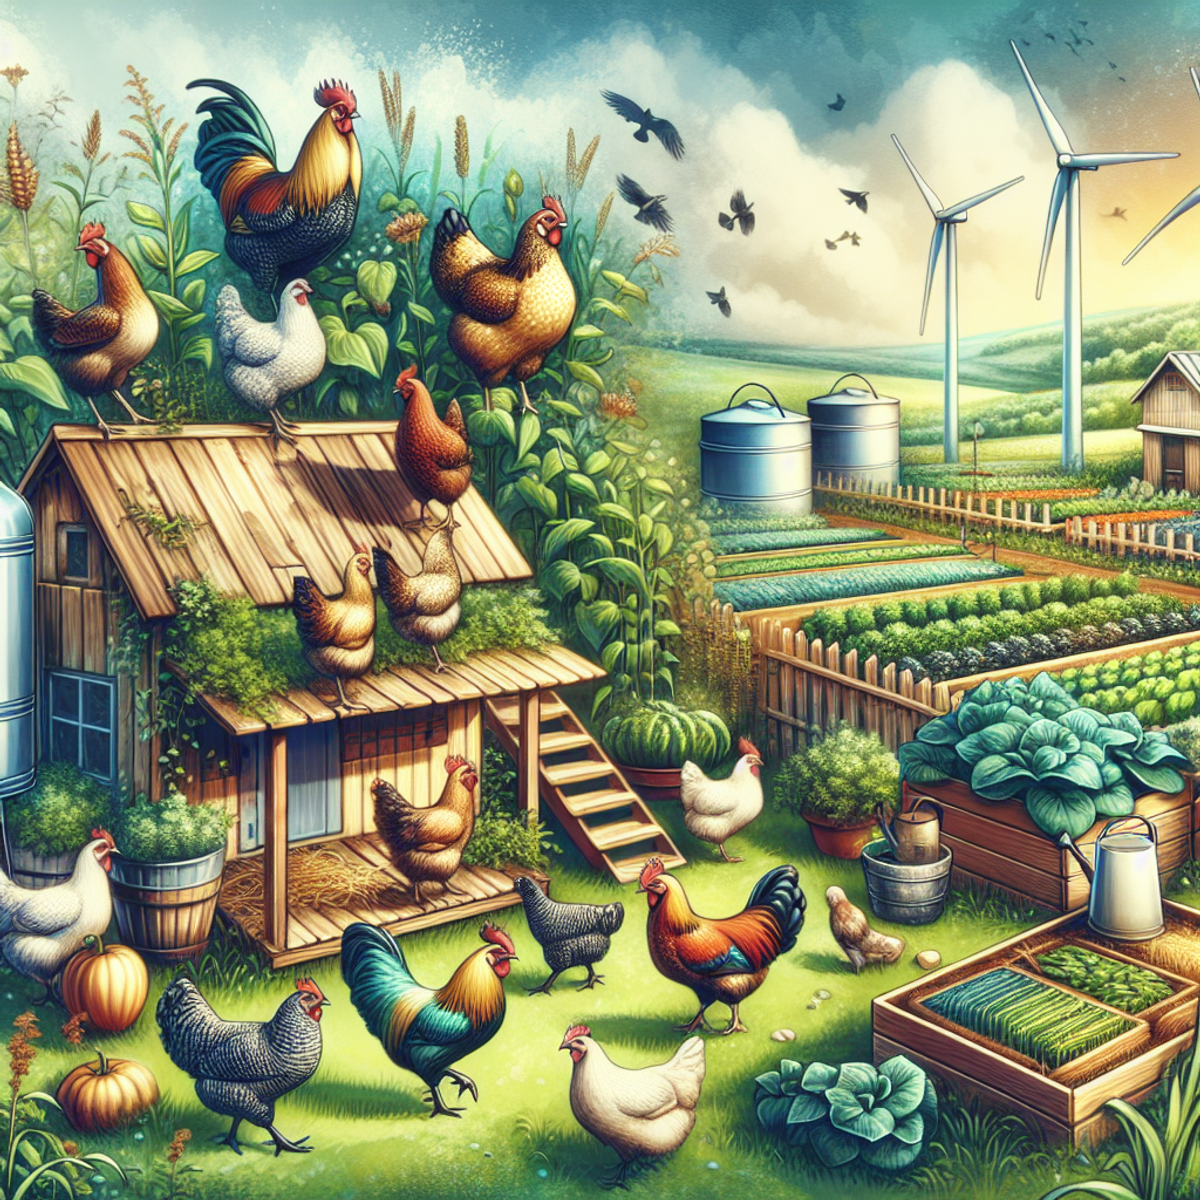 Heritage breed chickens freely roaming around a wooden coop, with wind turbines and a vegetable garden in the background.